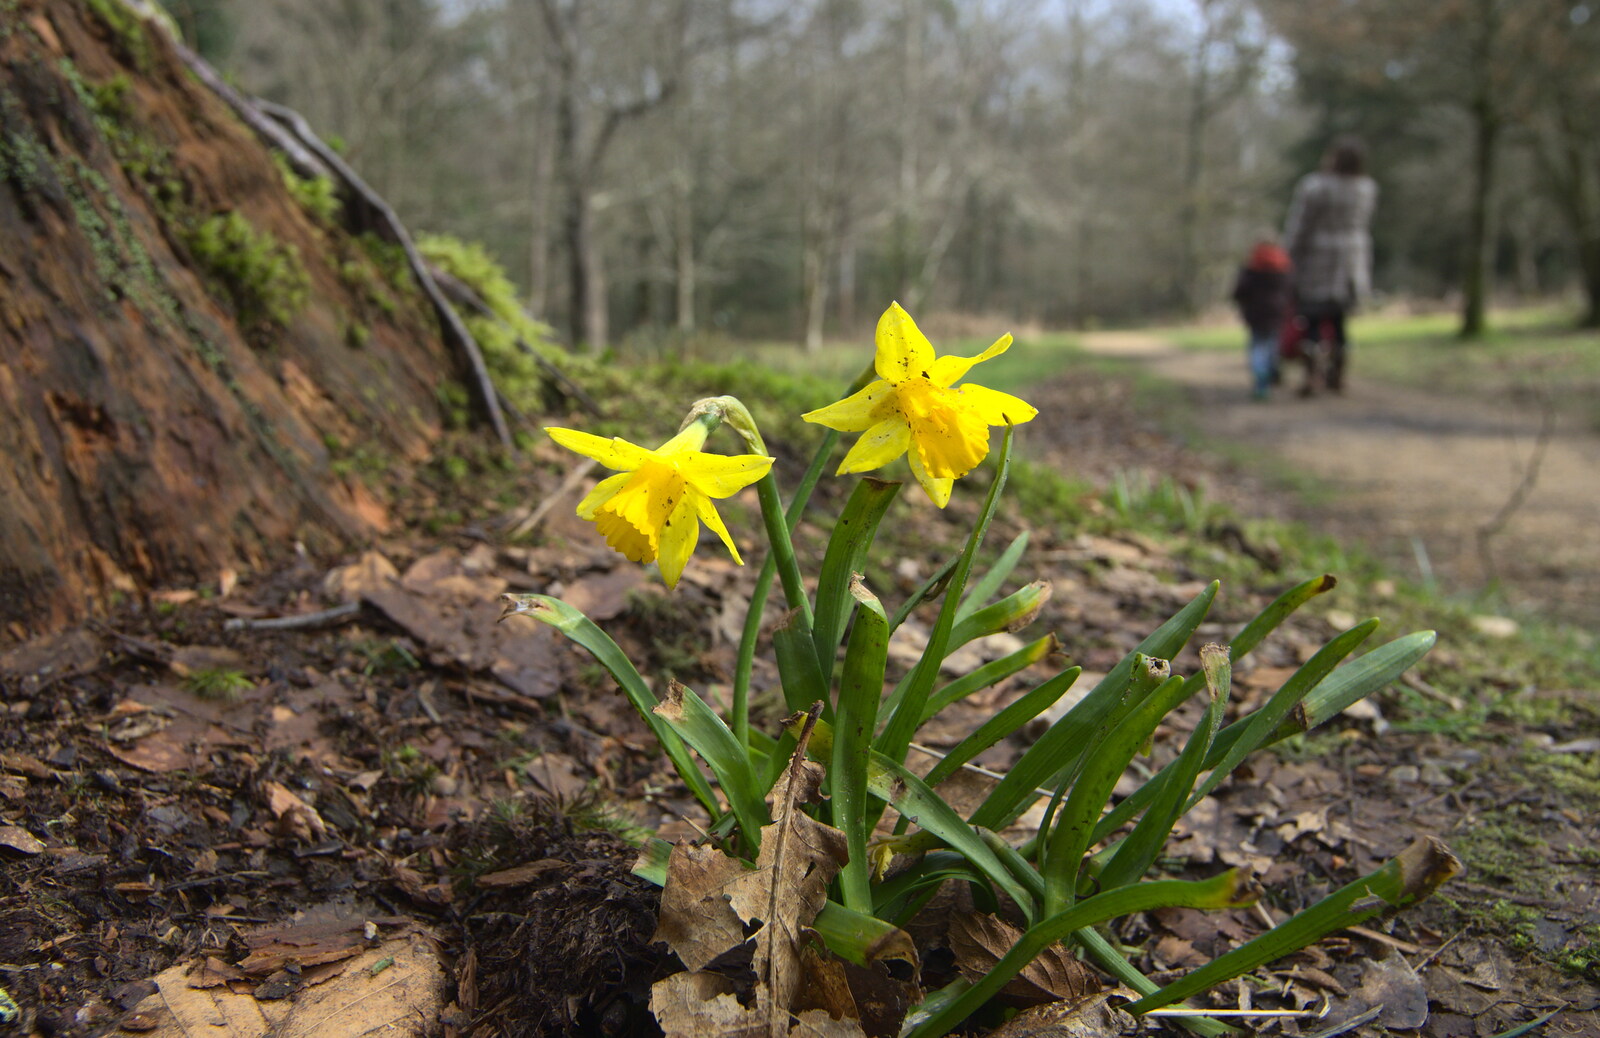 A couple of daffodils from The Ornamental Drive, Rhinefield, New Forest - 20th March 2013